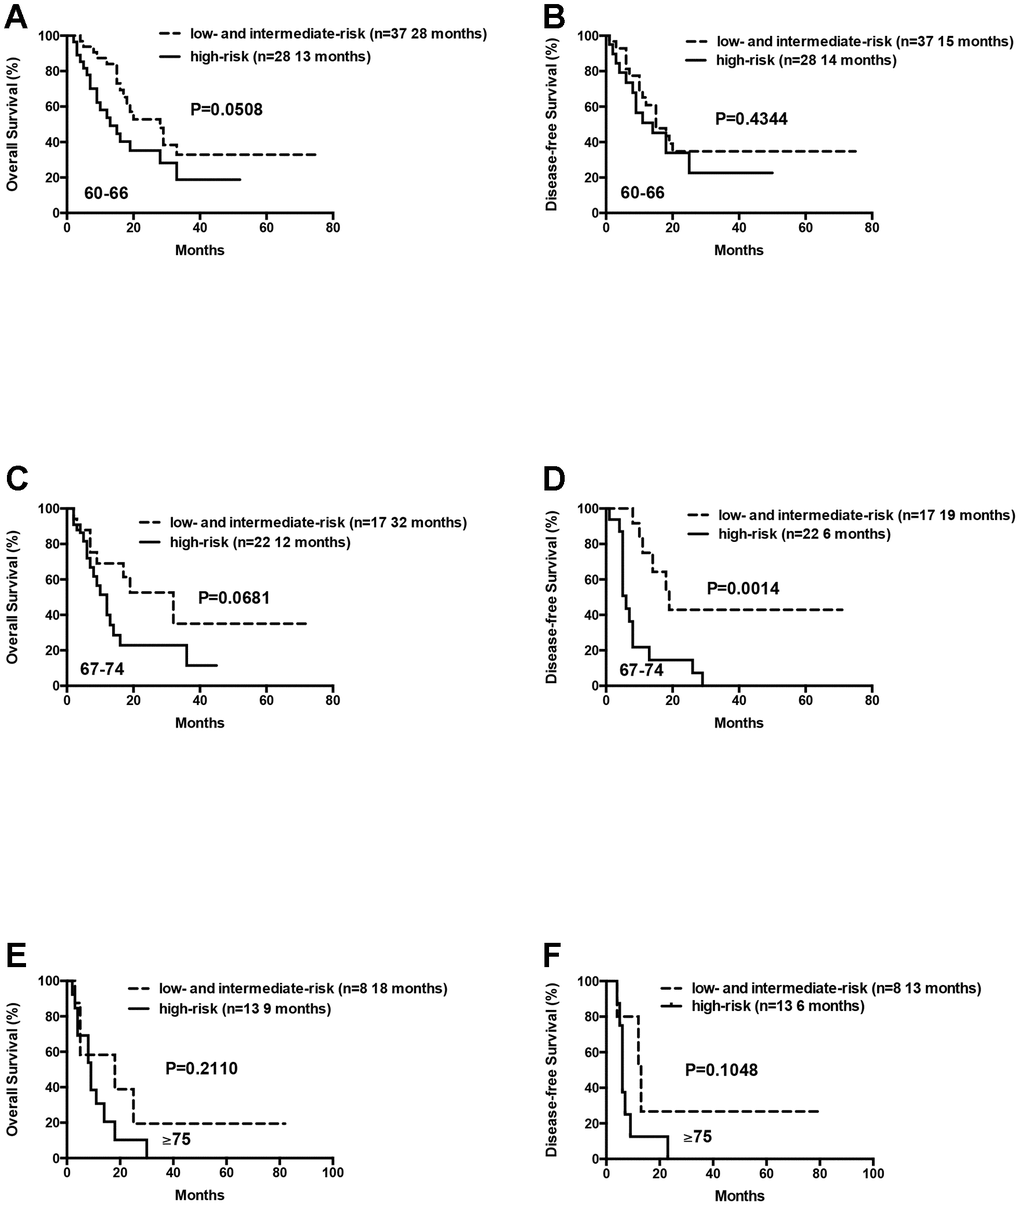 Overall survival and disease free survival of the AML patients according to risk groups (favorable and intermediate vs poor) within age arms (60-66 vs 67-74 vs ≥ 75 years). (A) Overall survival of the AML patients aged 60-66 years according to risk groups. (B) Disease free survival of the AML patients aged 60-66 years according to risk groups. (C) Overall survival of the AML patients aged 67-74 years according to risk groups. (D) Disease free survival of the AML patients aged 67-74 years according to risk groups. (E) Overall survival of the AML patients aged ≥75 years according to risk groups. (F) Disease free survival of the AML patients aged ≥75 years according to risk groups.